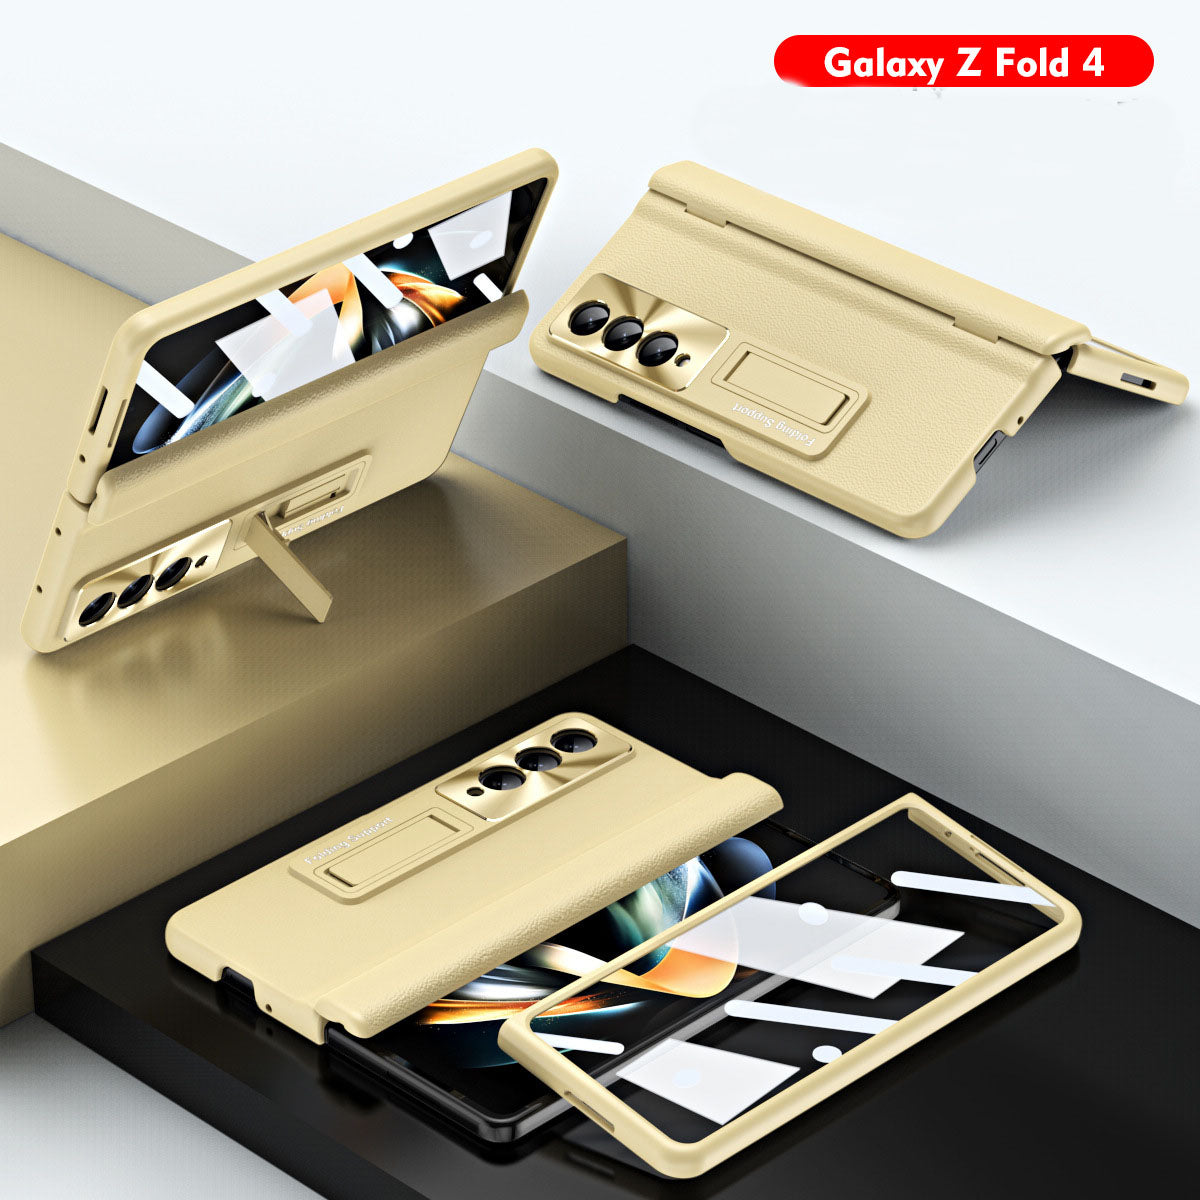 Luxury Leather Samsung Galaxy Z Fold5 Fold4 Fold3 Case with Screen Protector/Stand/Pen slot